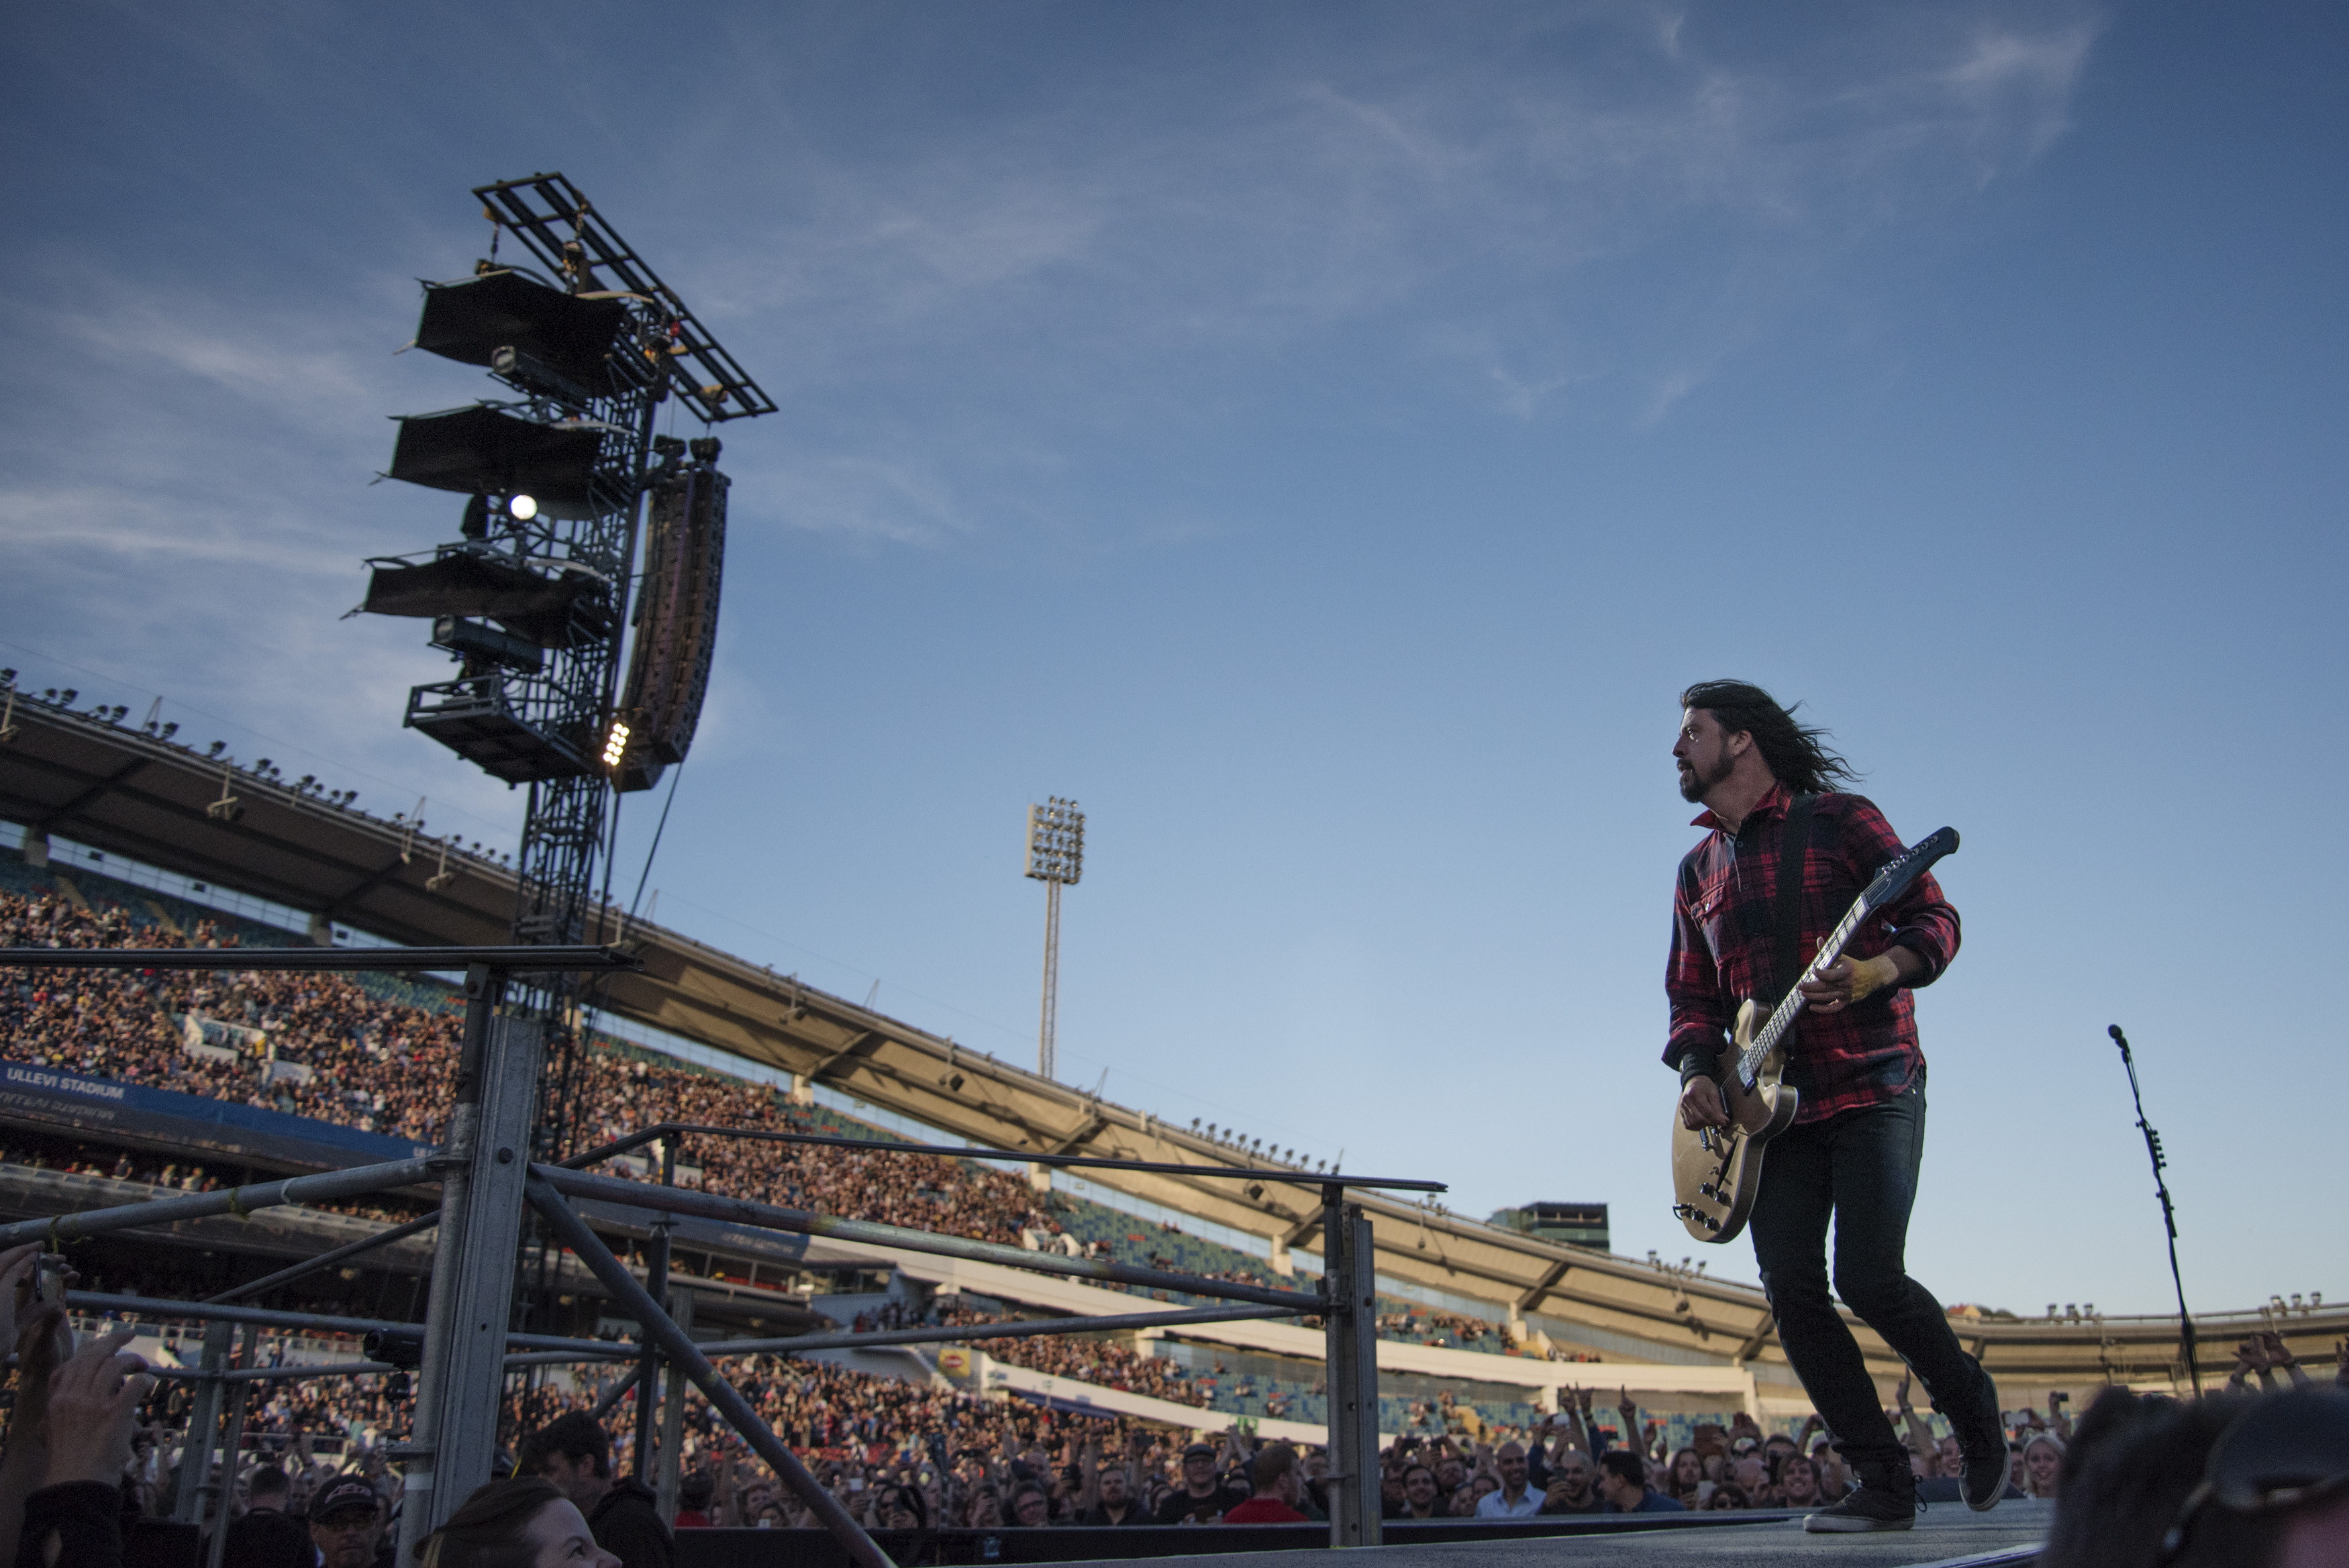 Foo Fighters band member Dave Grohl performs during the band's concert at Nya Ullevi in Gothenburg, Sweden, on June 12, 2015, before falling off the stage. (TT News Agency/Reuters)